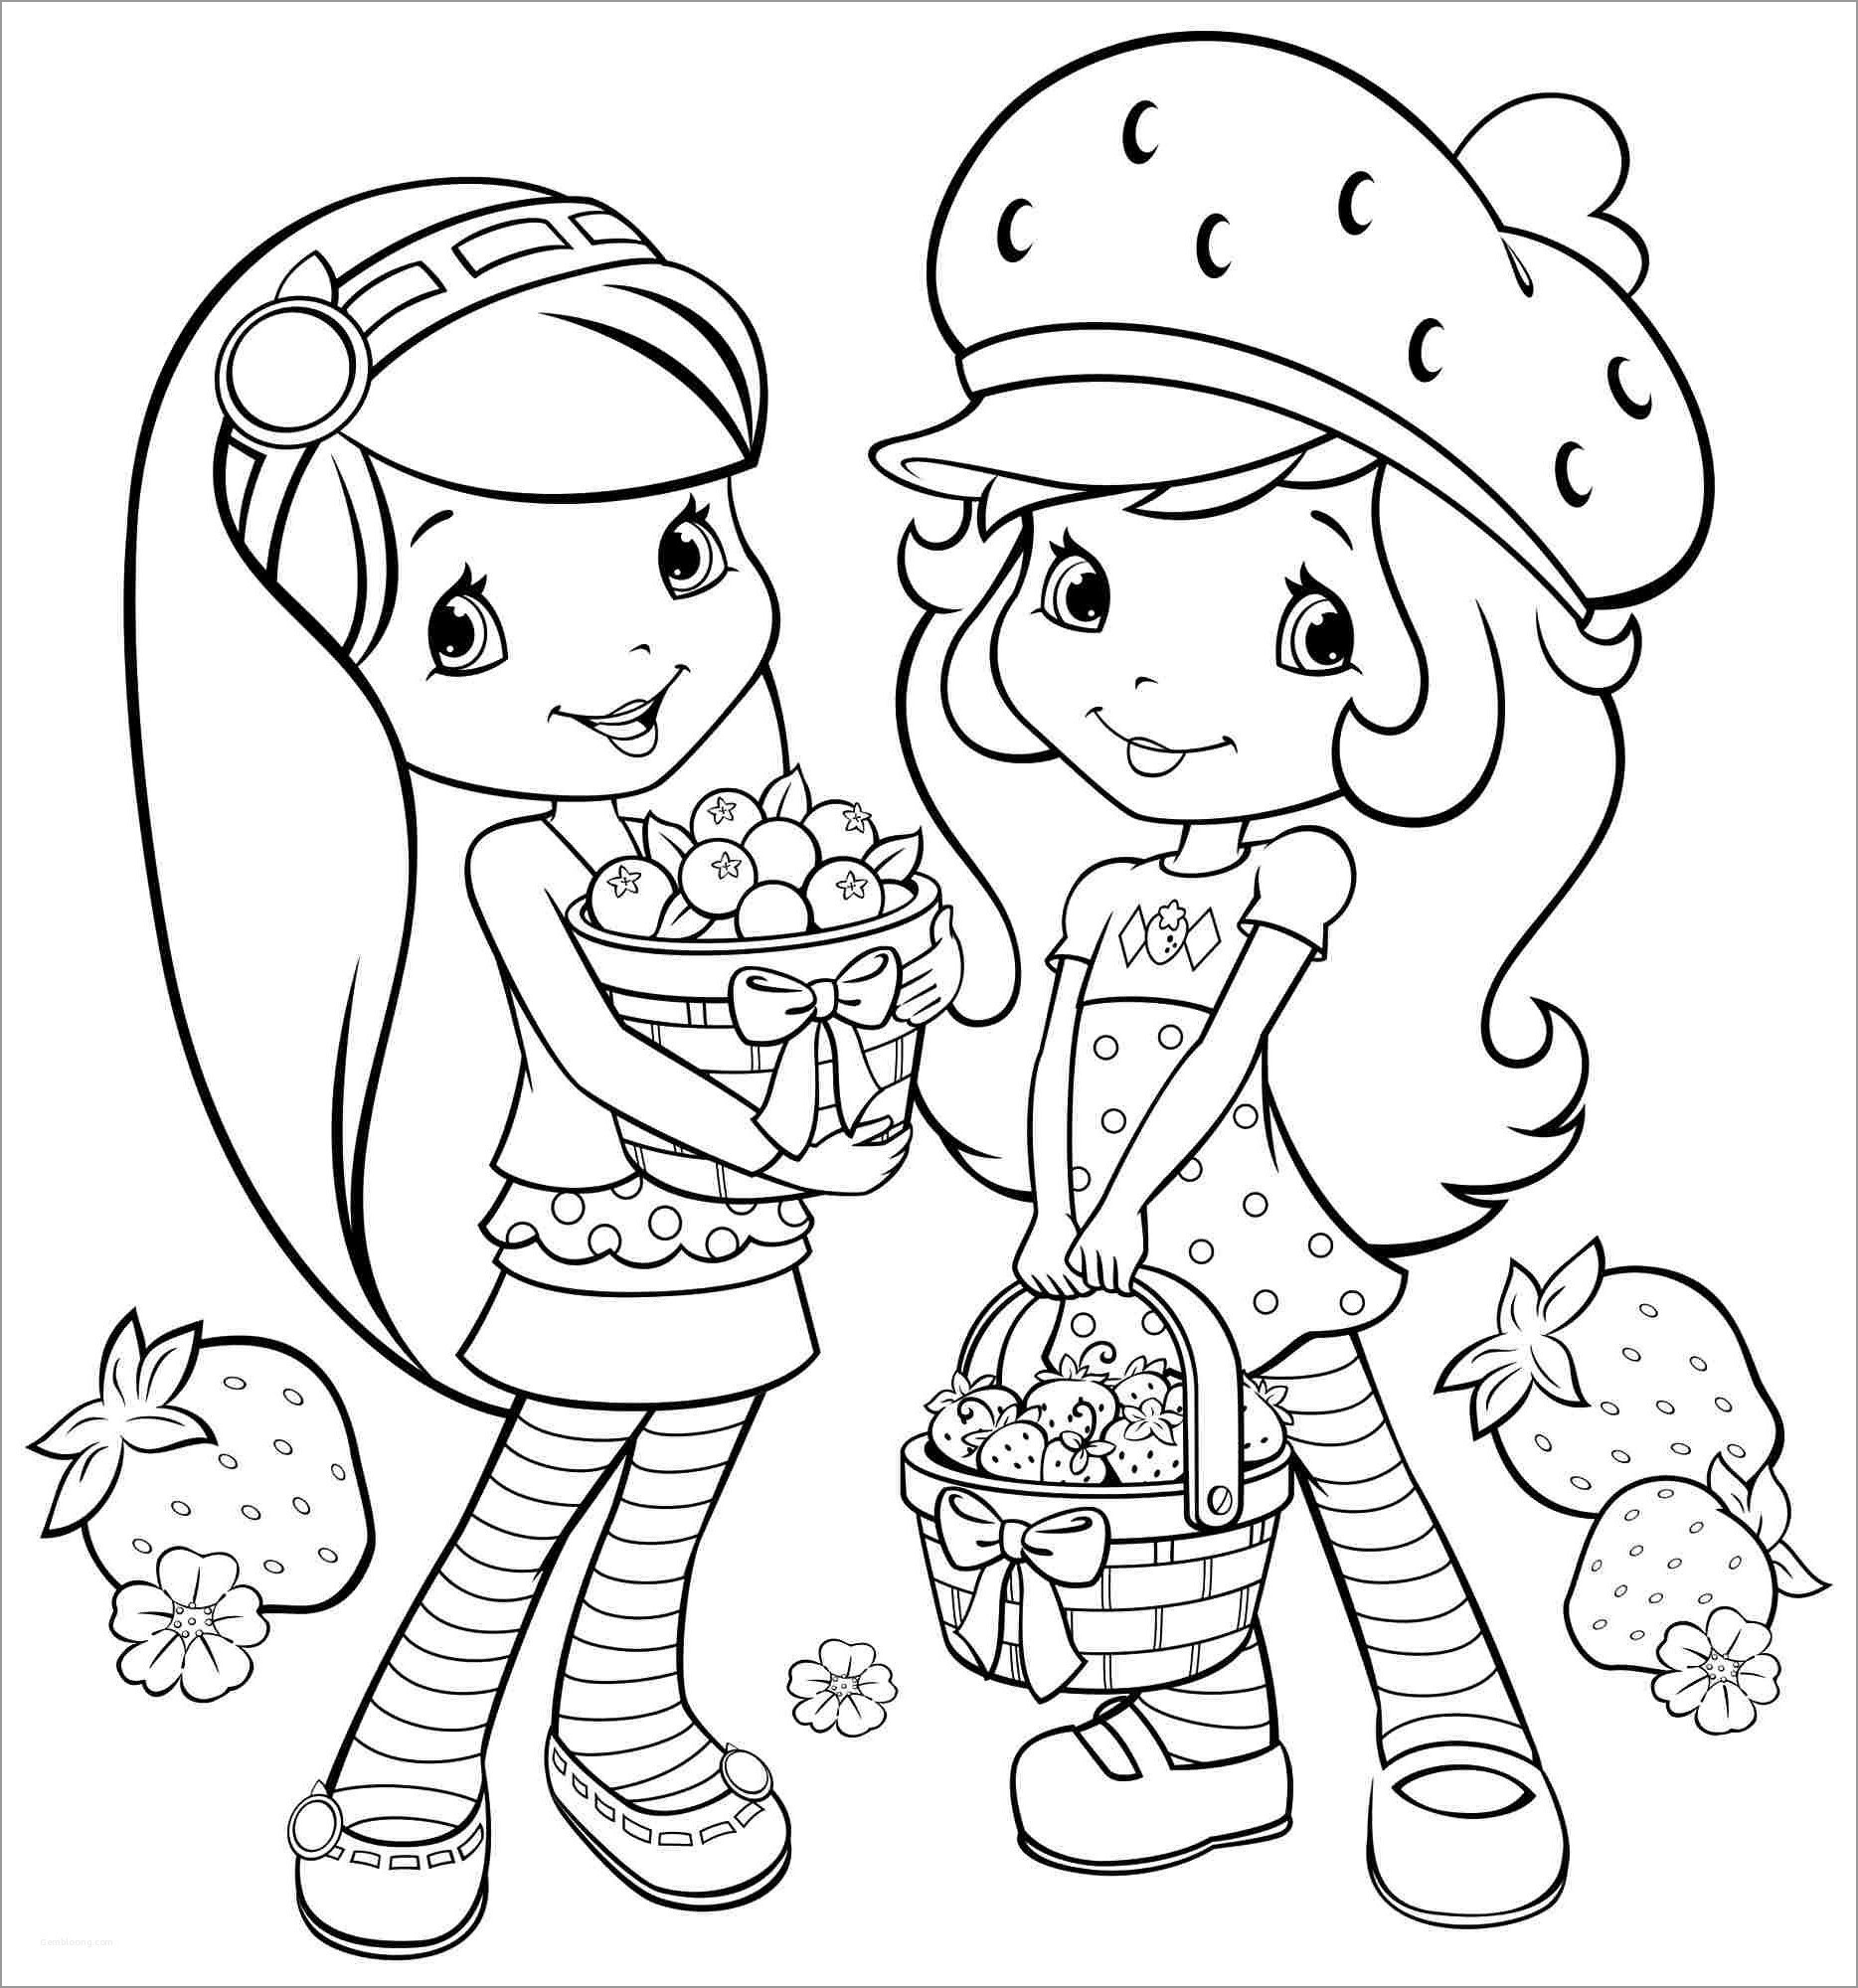 Strawberry Shortcake Coloring Pages For Girls Coloringbay